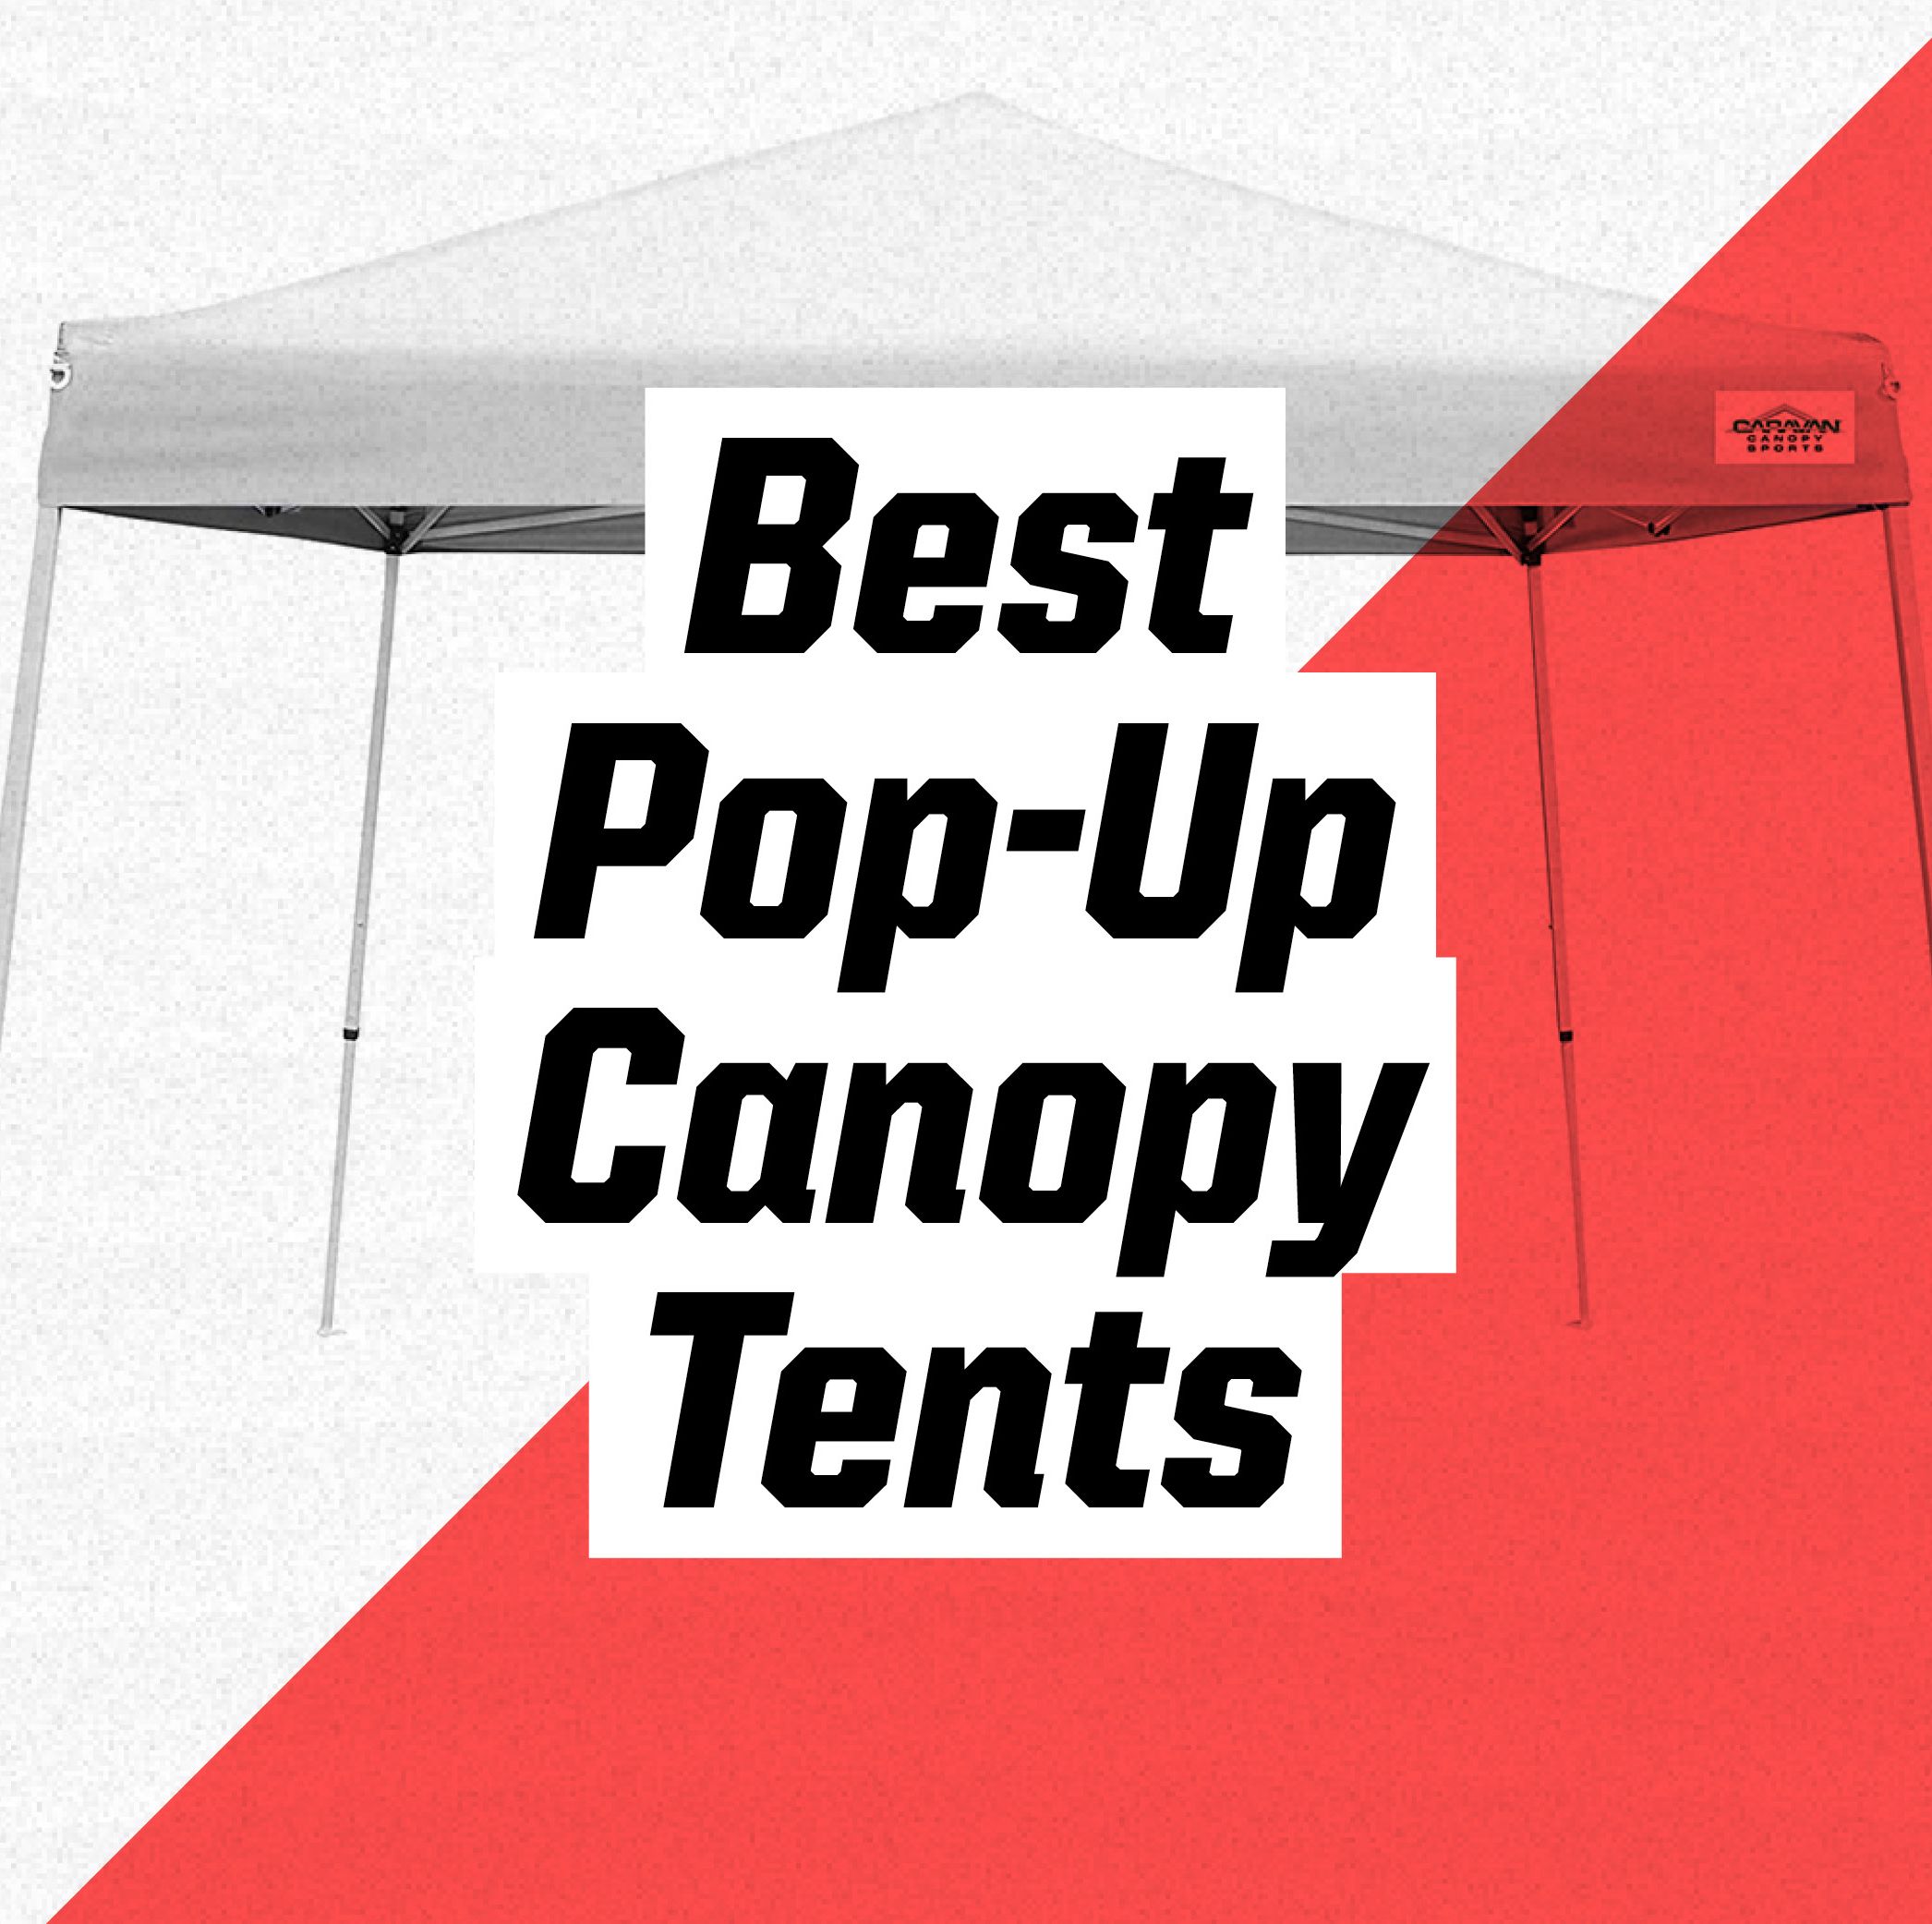 We Have You Covered: 9 Best Pop-Up Canopy Tents